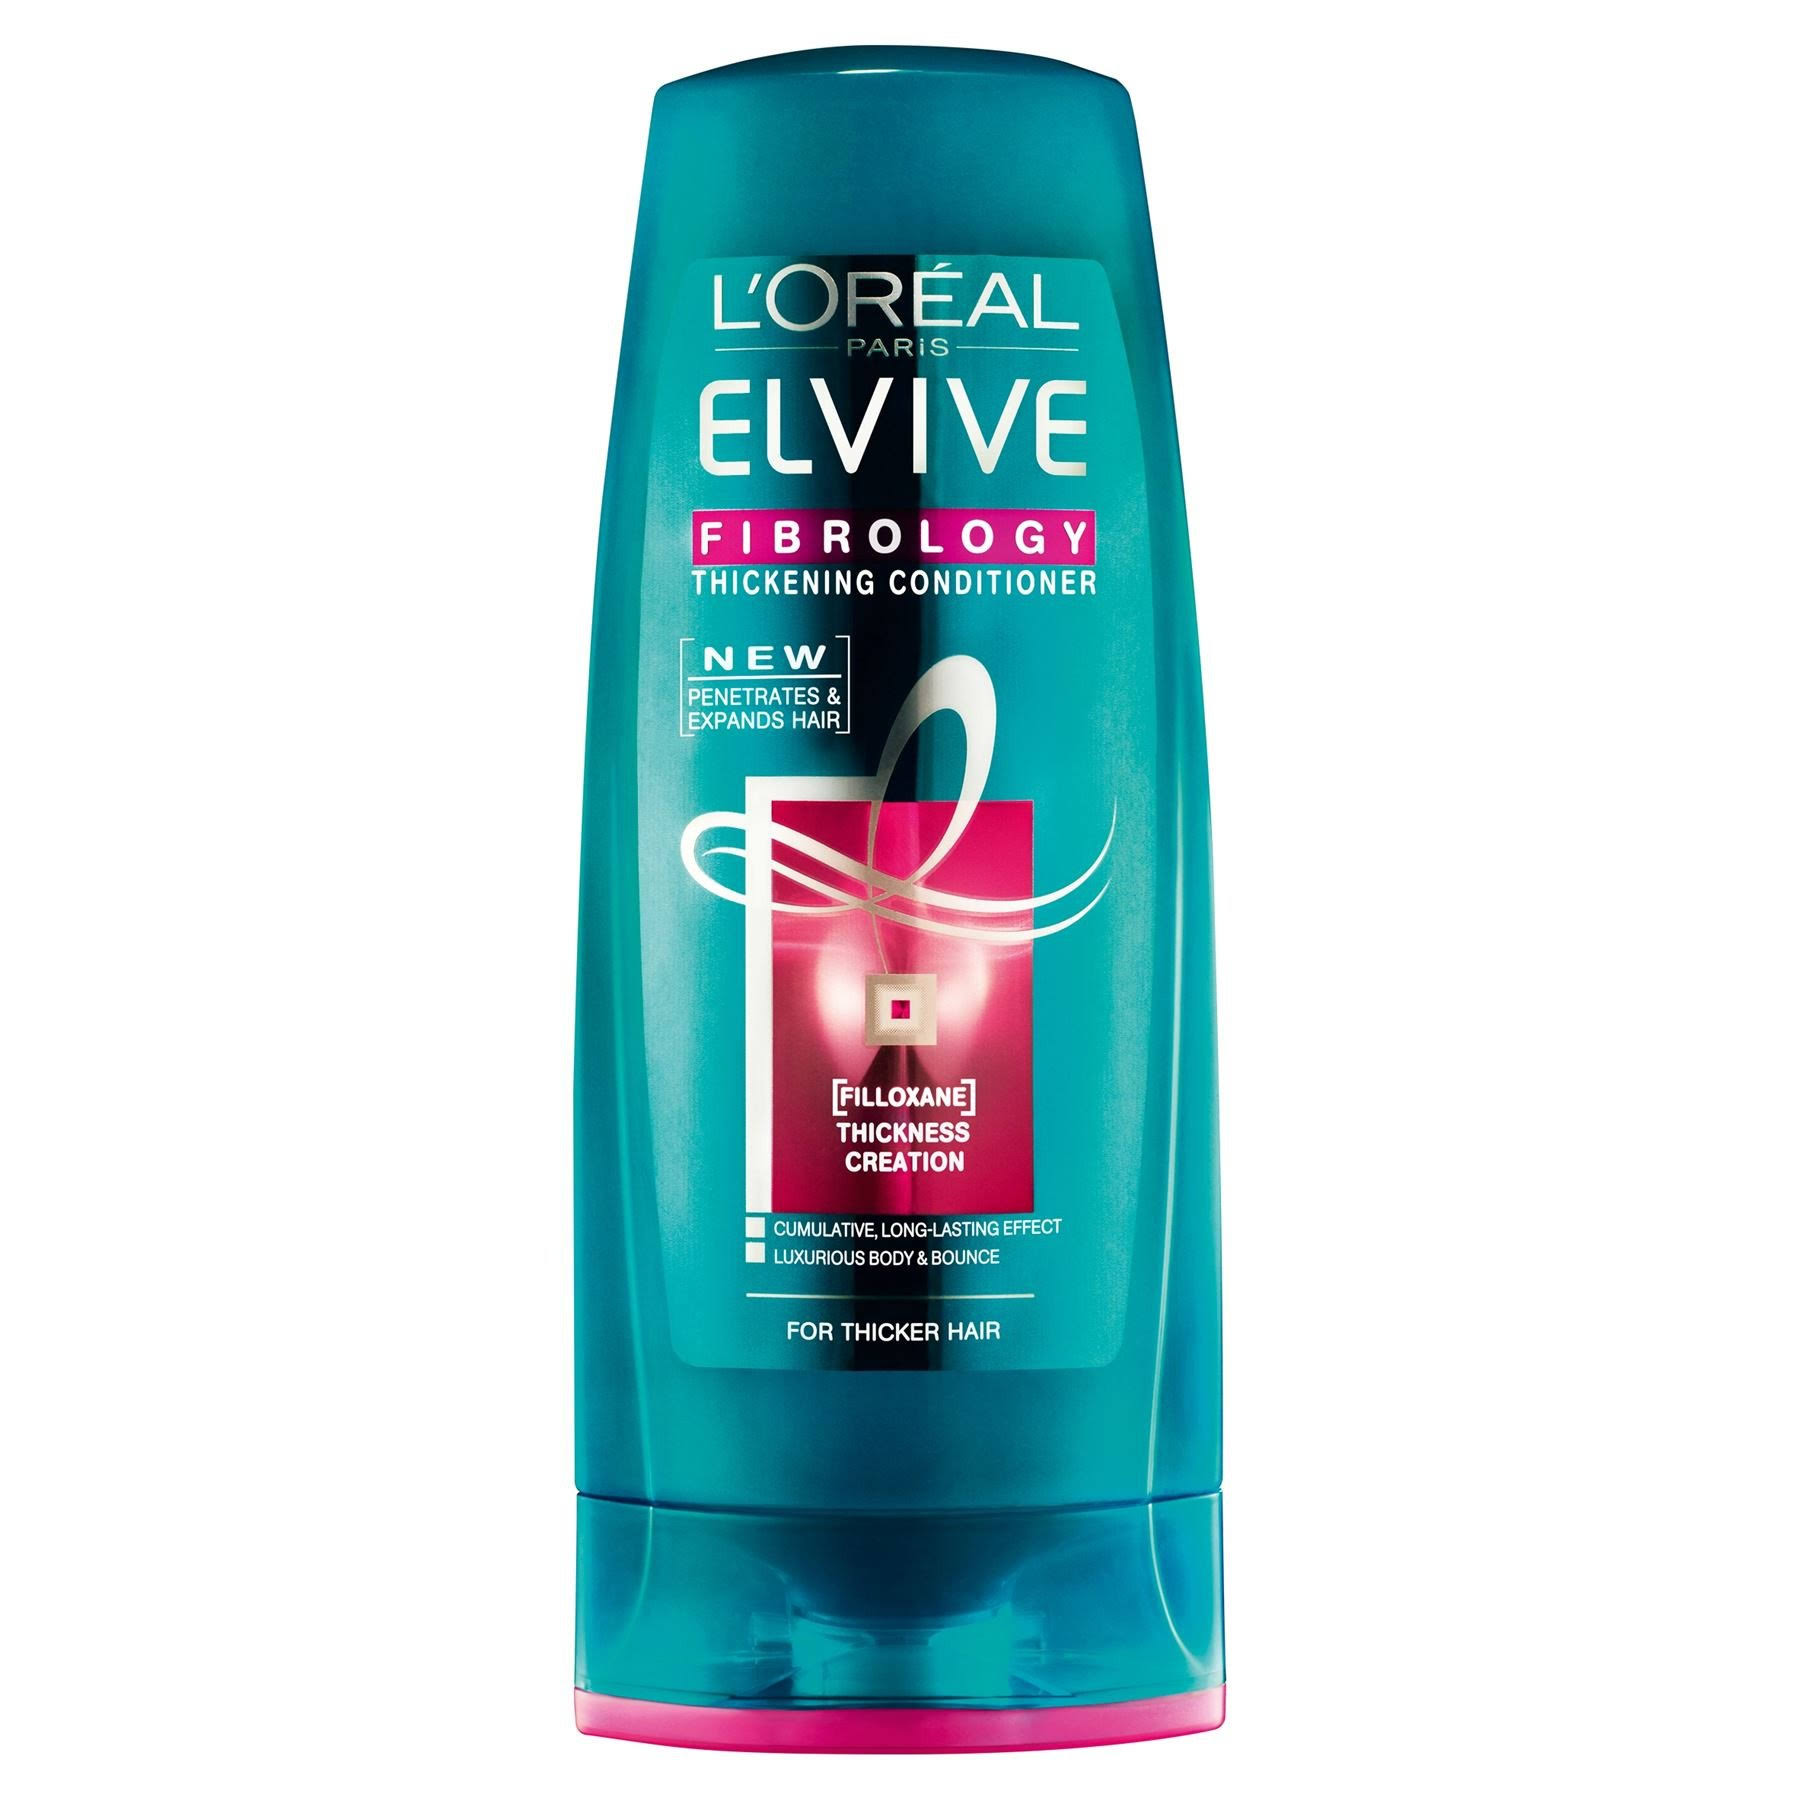 L'Oreal Paris Elvive Fibrology Thickening Conditioner 400ml